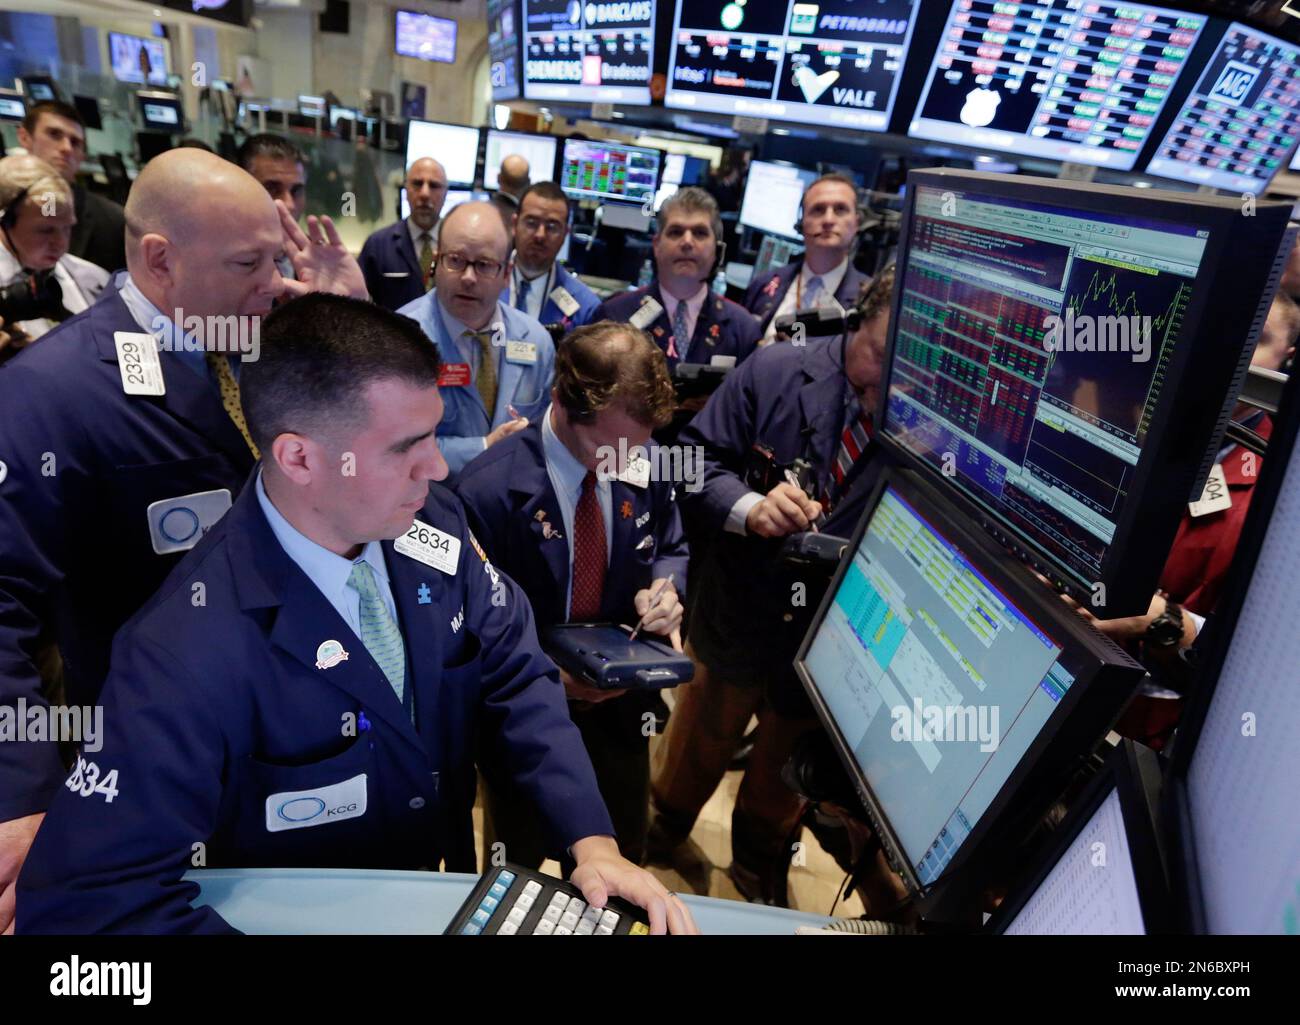 Specialists Michael O'Connor, left, and Matthew Diez, foreground left, work with traders at the post that handles US Steel, on the floor of the New York Stock Exchange Thursday, Oct. 17, 2013. Weak earnings from IBM and other major U.S. companies are dragging the stock market lower in early trading. (AP Photo/Richard Drew) Stock Photo